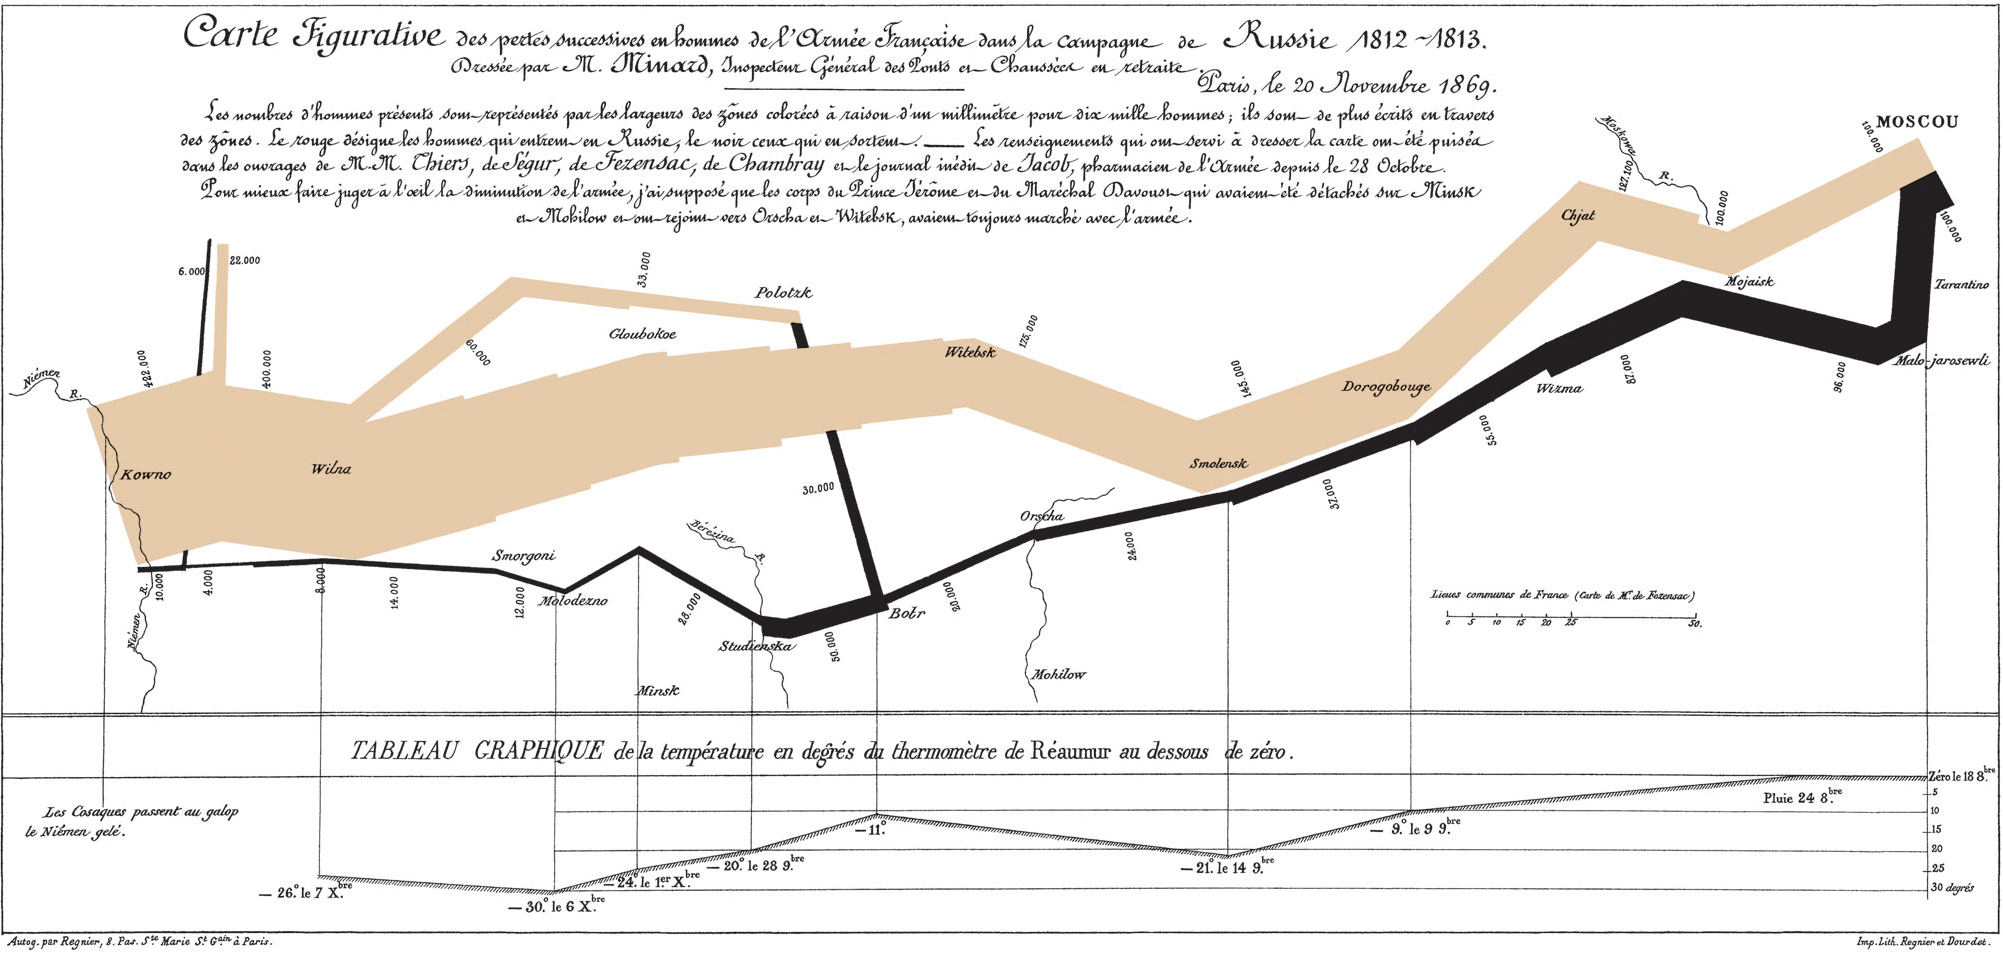 Minard's visualization of Napoleon's retreat from Moscow. Justifiably cited as a classic, it is also atypical and hard to emulate in its specifics.